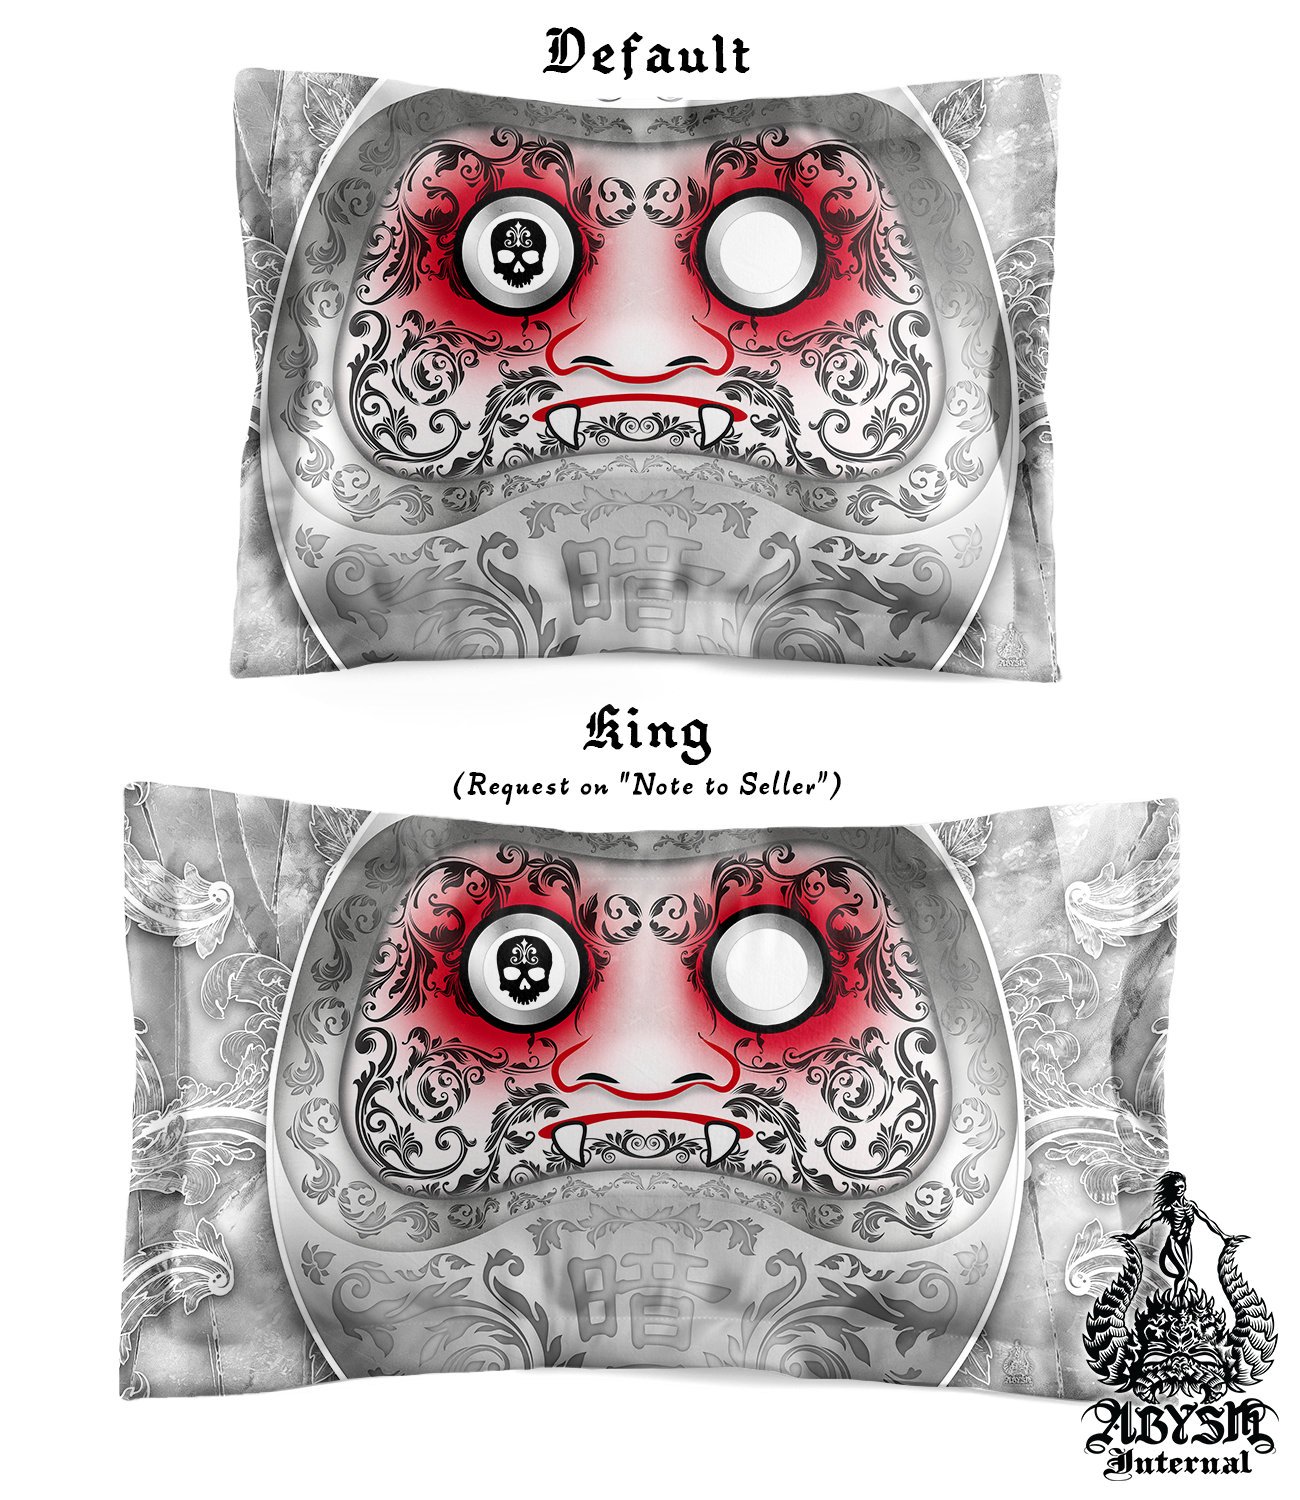 Daruma Bedding Set, Comforter and Duvet, Funny White Goth Bed Cover and Bedroom Decor, King, Queen and Twin Size - Japanese Art - Abysm Internal